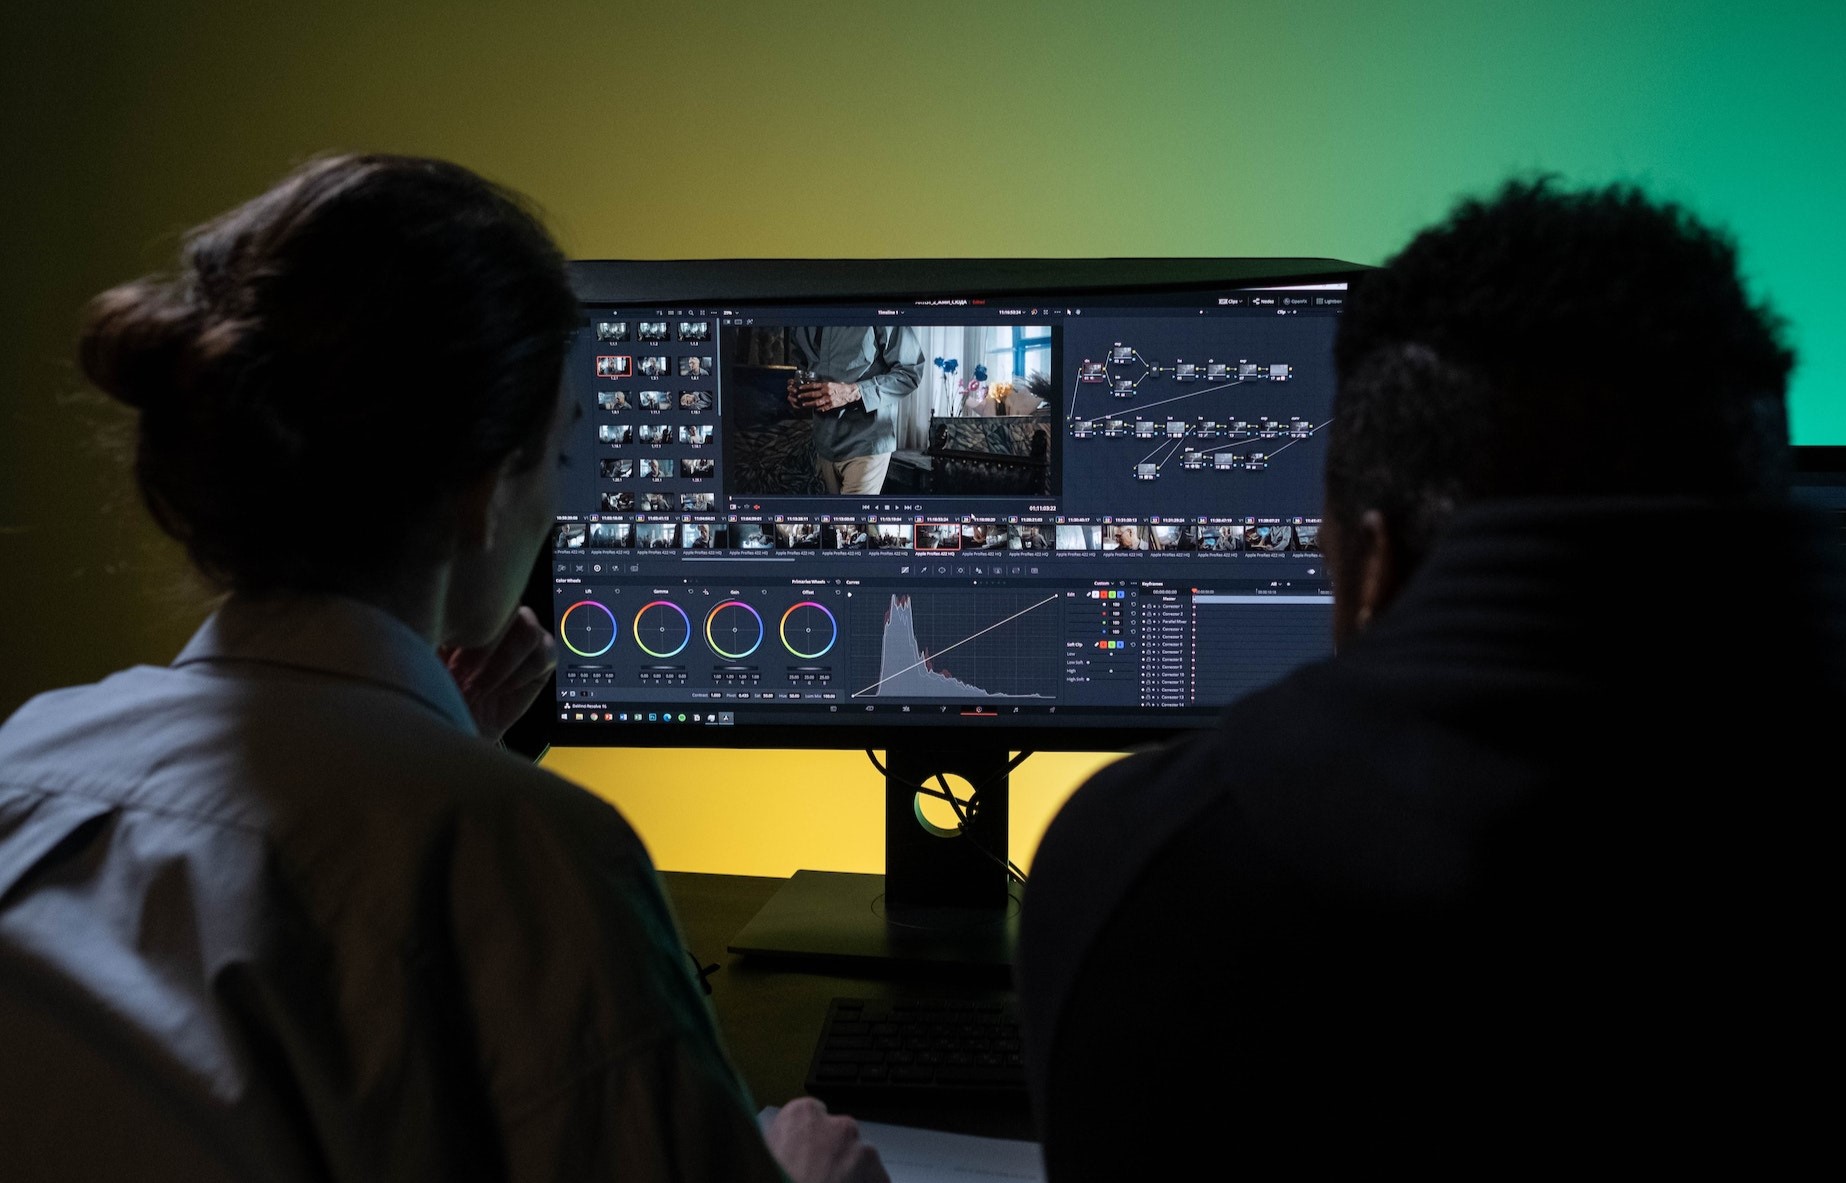 Is Video Editing A Good Career?